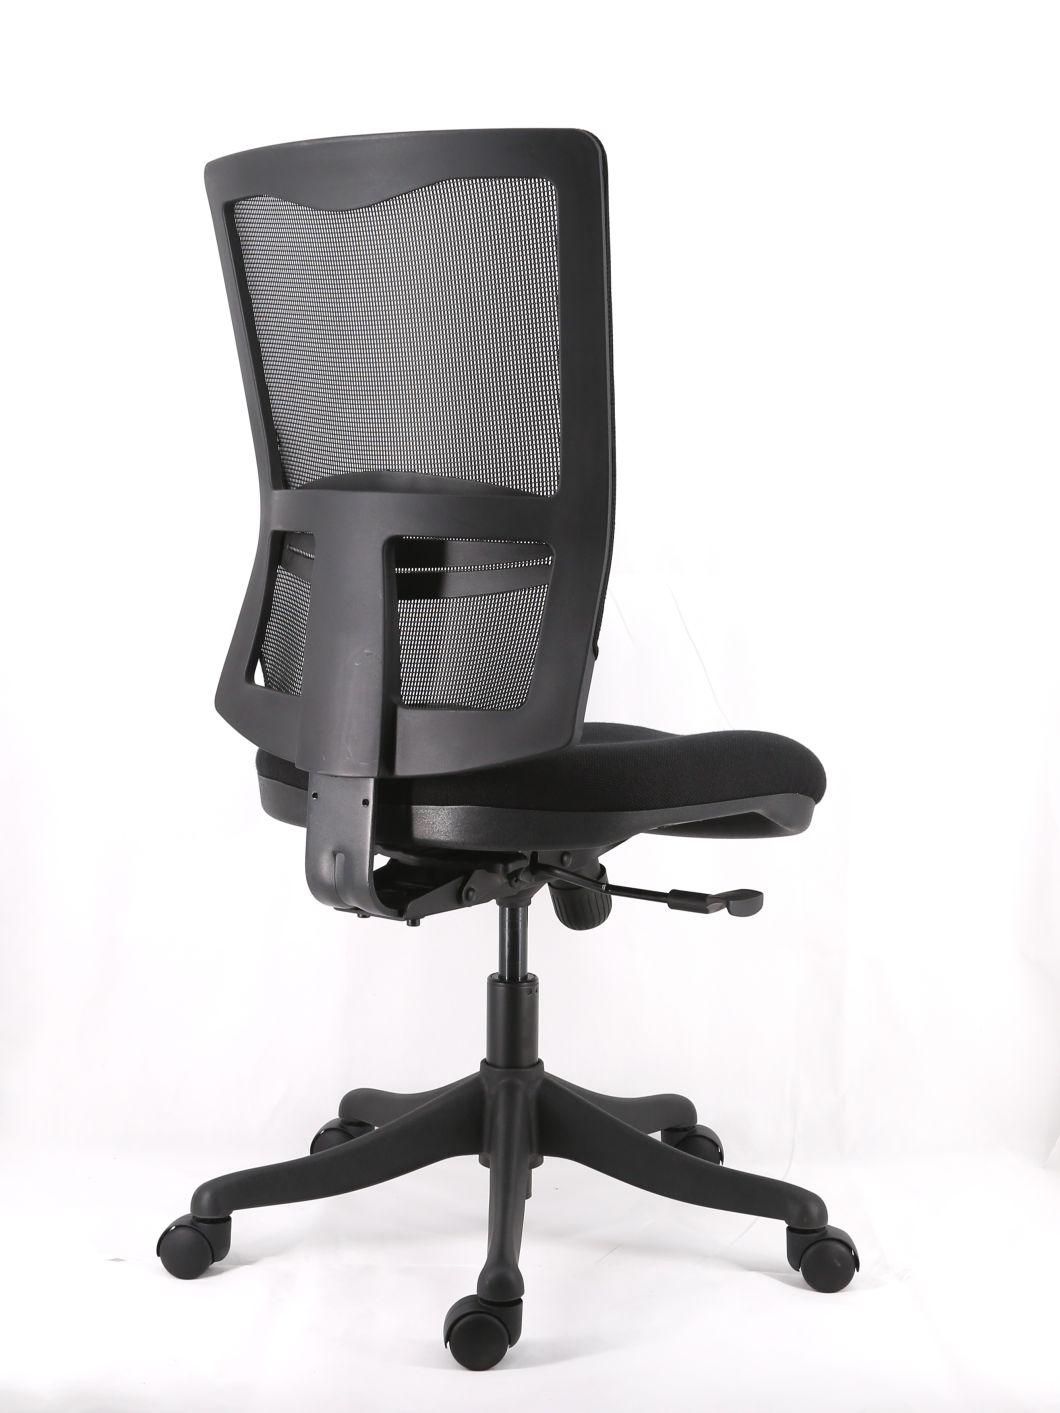 Mesh Upholstery Backrest with Lumbar Support Adjustable Armrest Simple Function Seat up and Down Mechanism Nylon Base Manger Office Chair